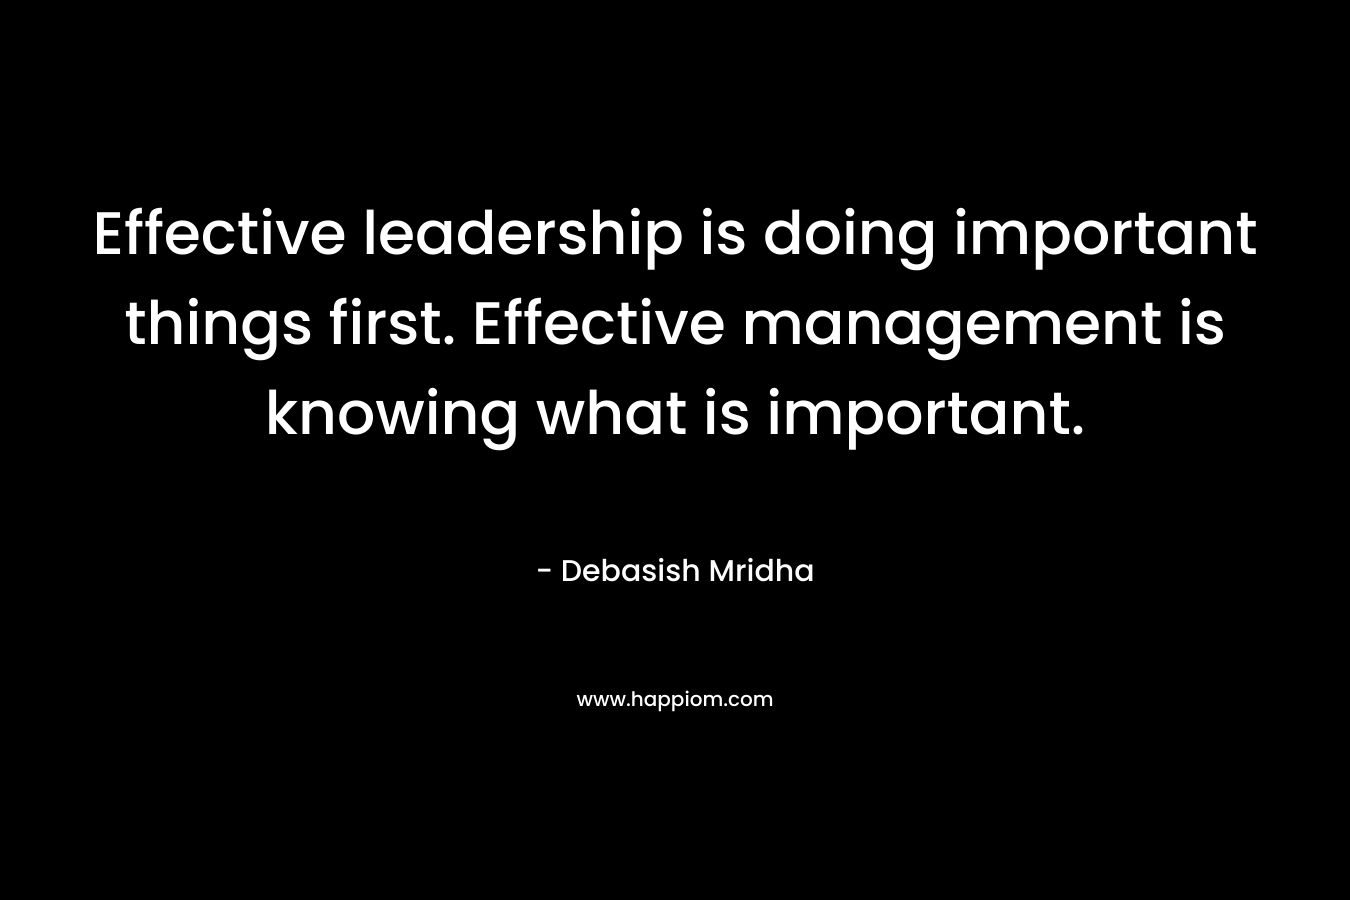 Effective leadership is doing important things first. Effective management is knowing what is important.